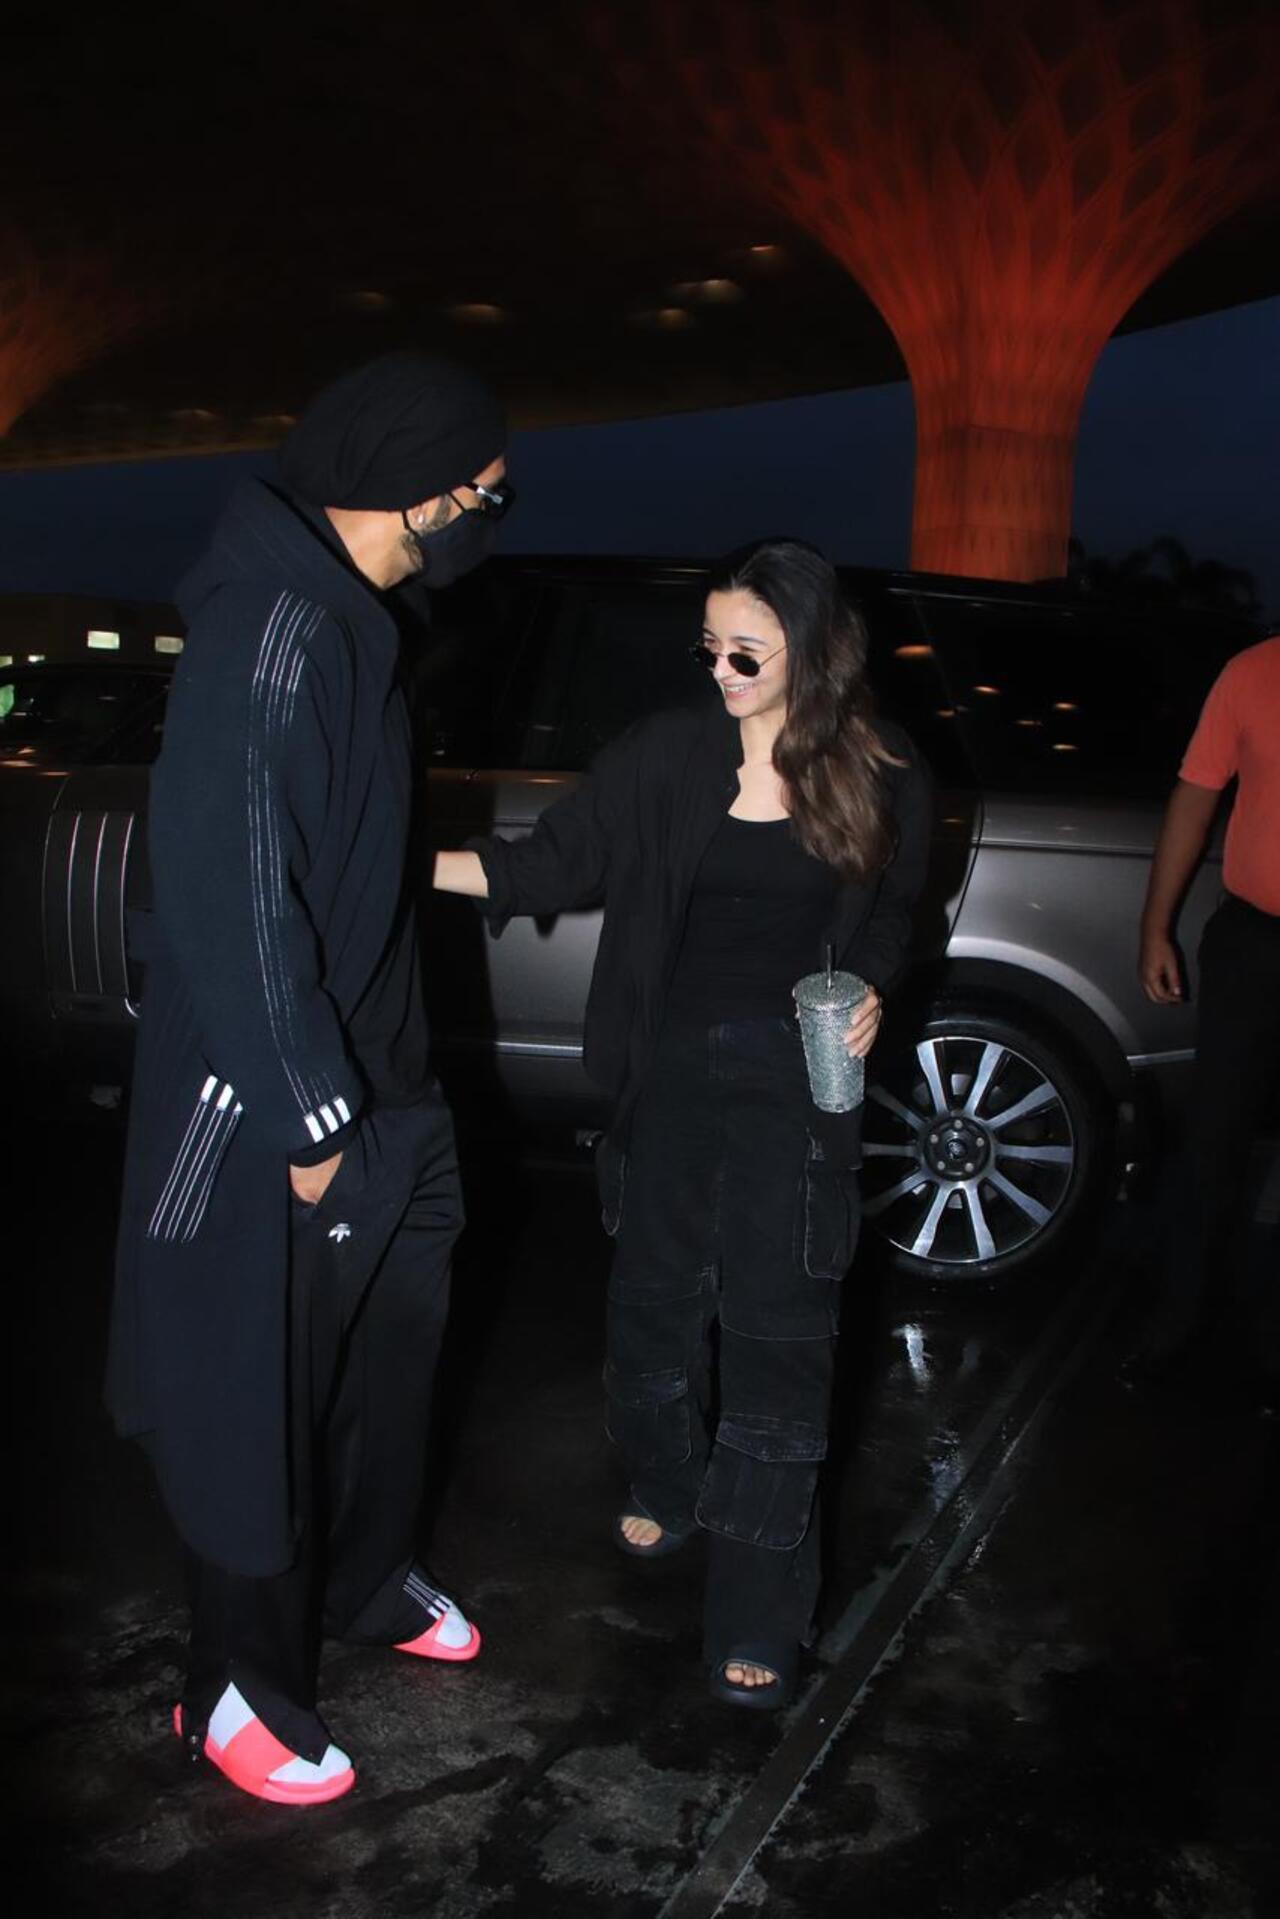 Ranveer and Alia were seen twinning in an all-black outfit. Looking at their expressions, it did not seem like they had planned to twin